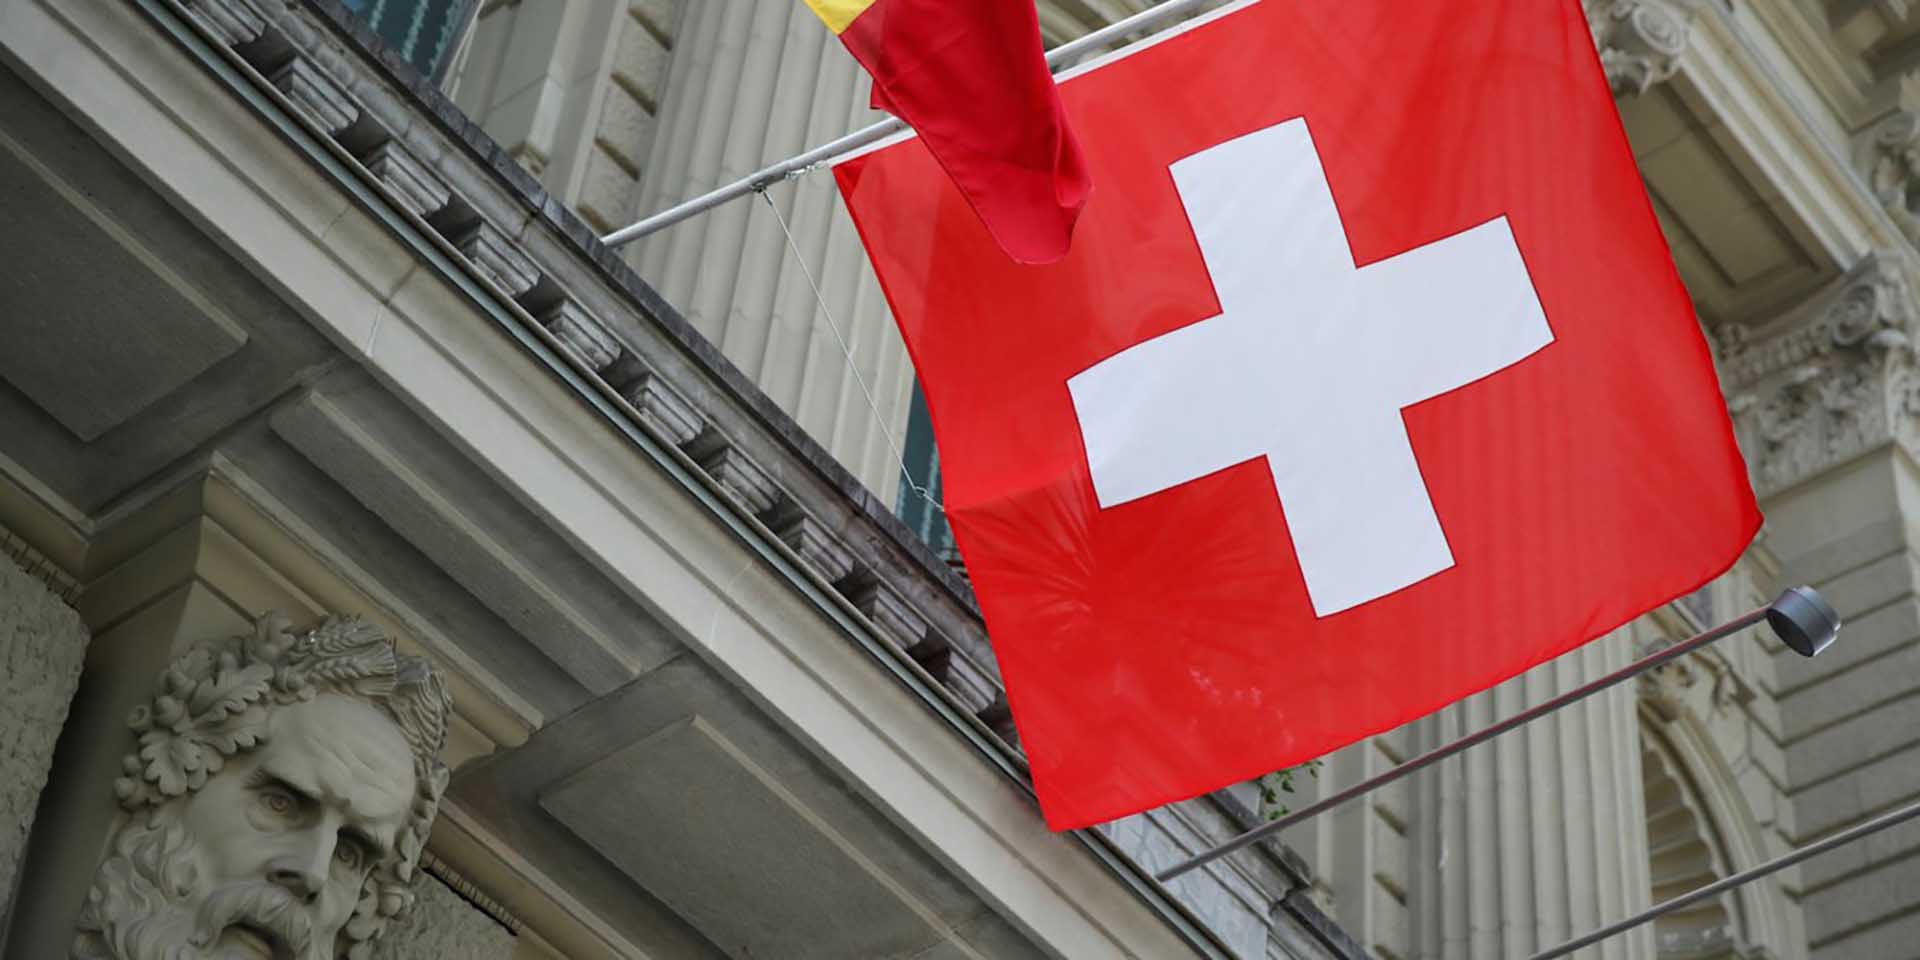 Crypto Isn’t Sound Money, Says Swiss Central Bank Official